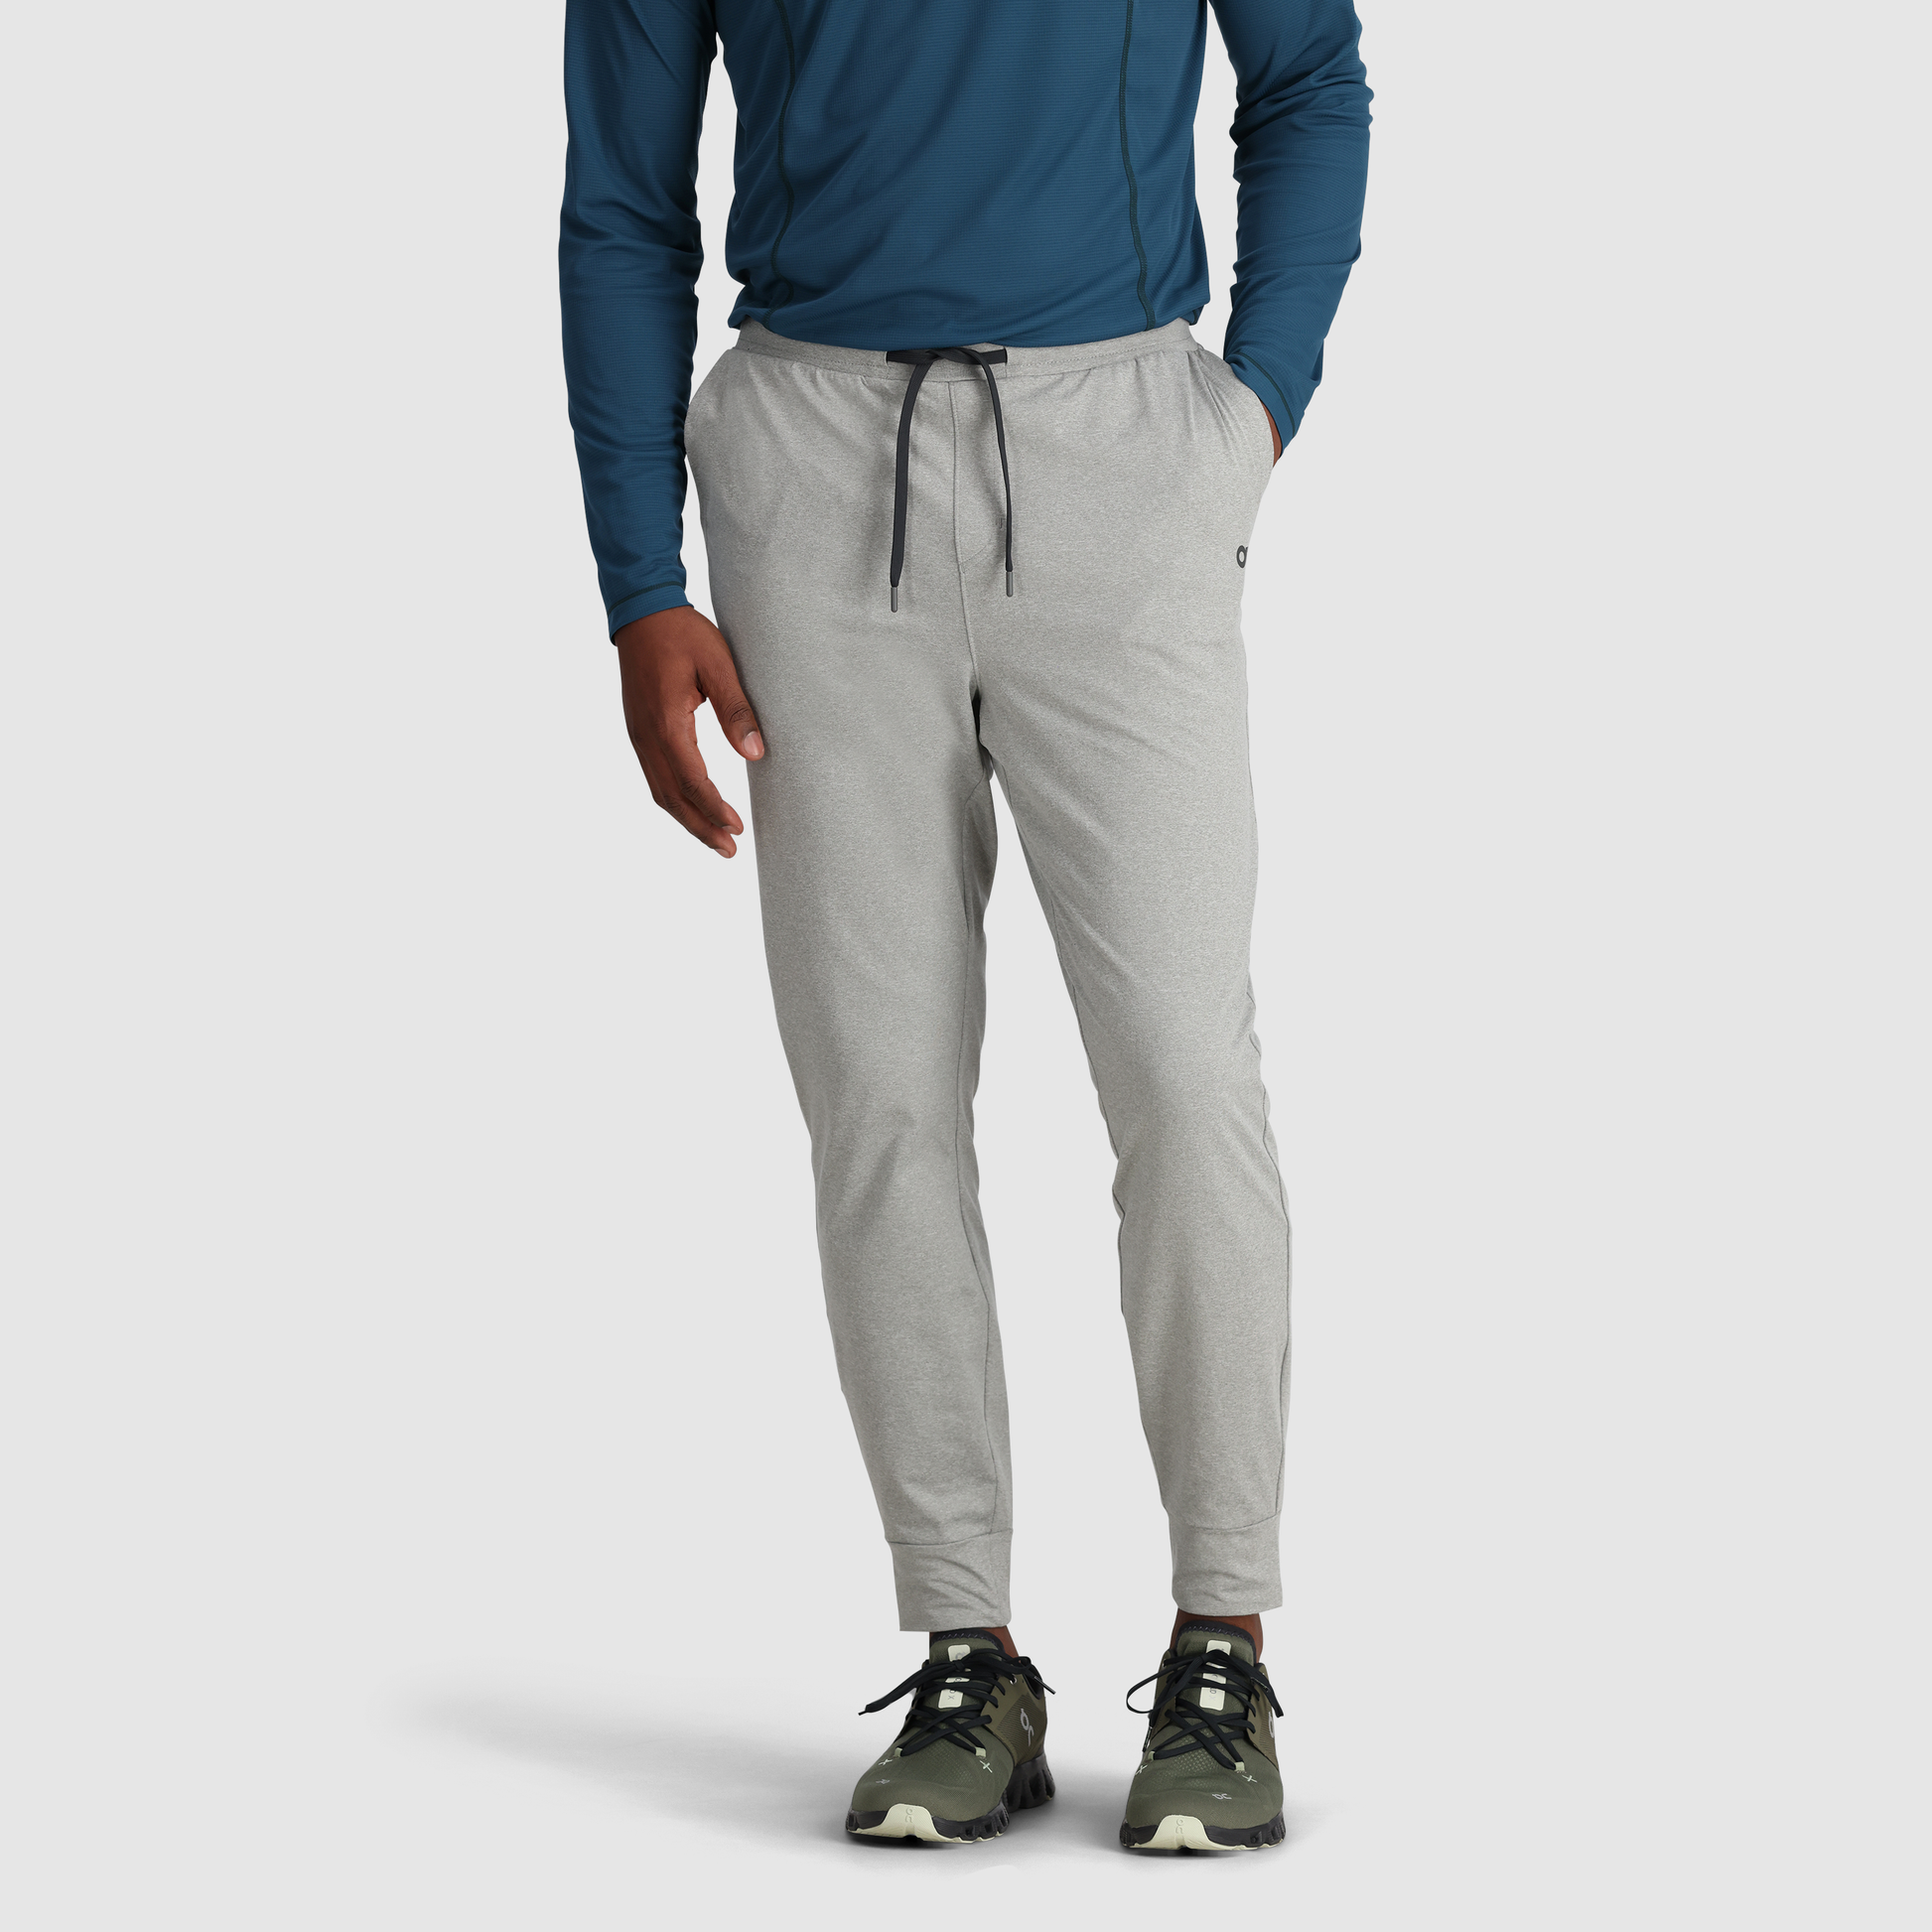 Compressed Jogger Athleisure - Chumbo - P